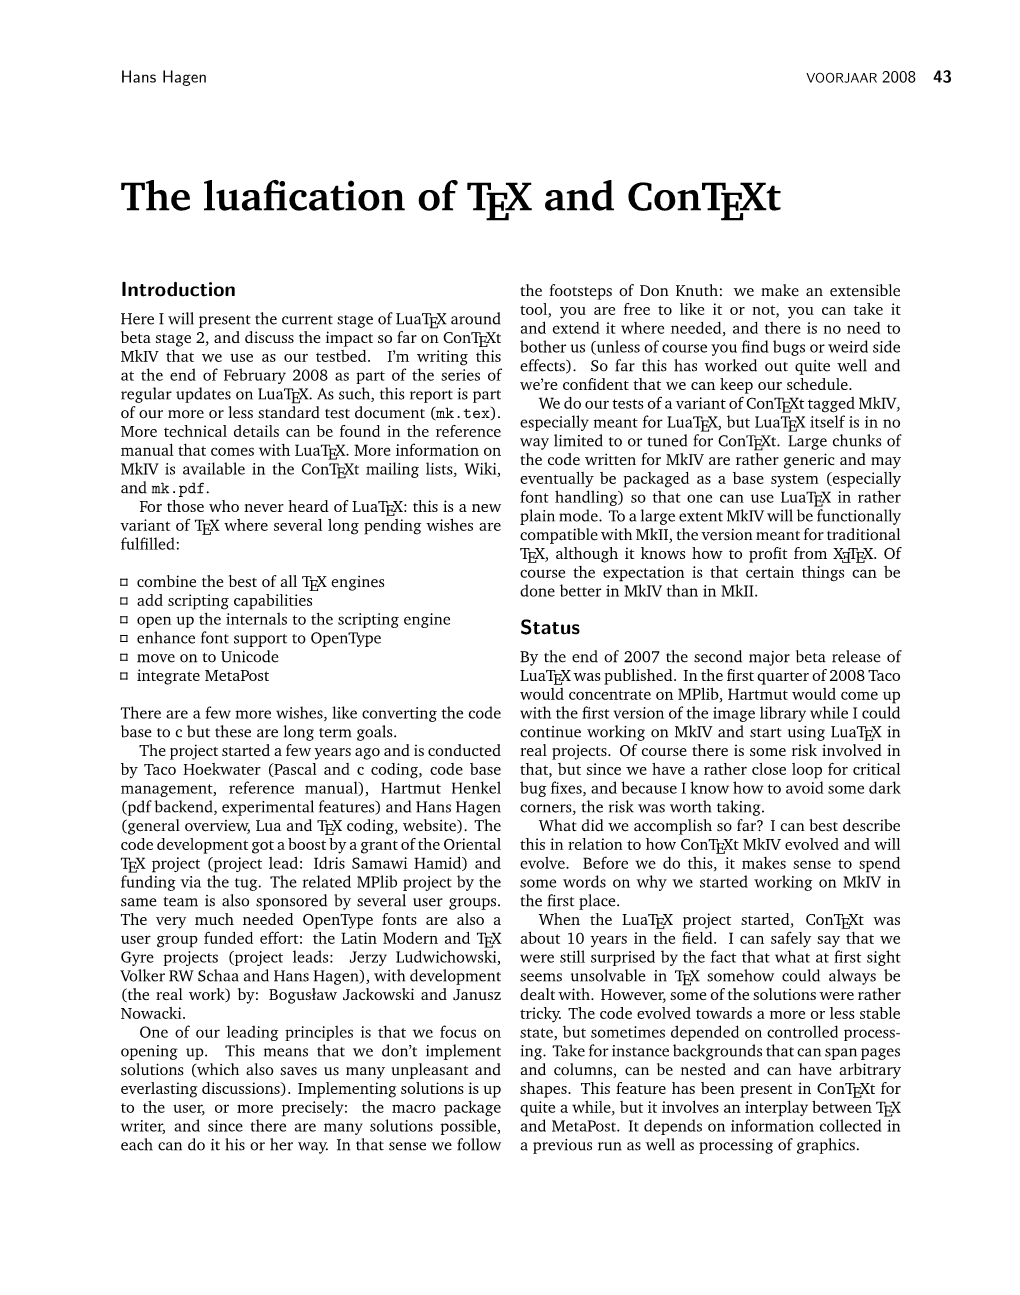 The Luafication of TEX and Context